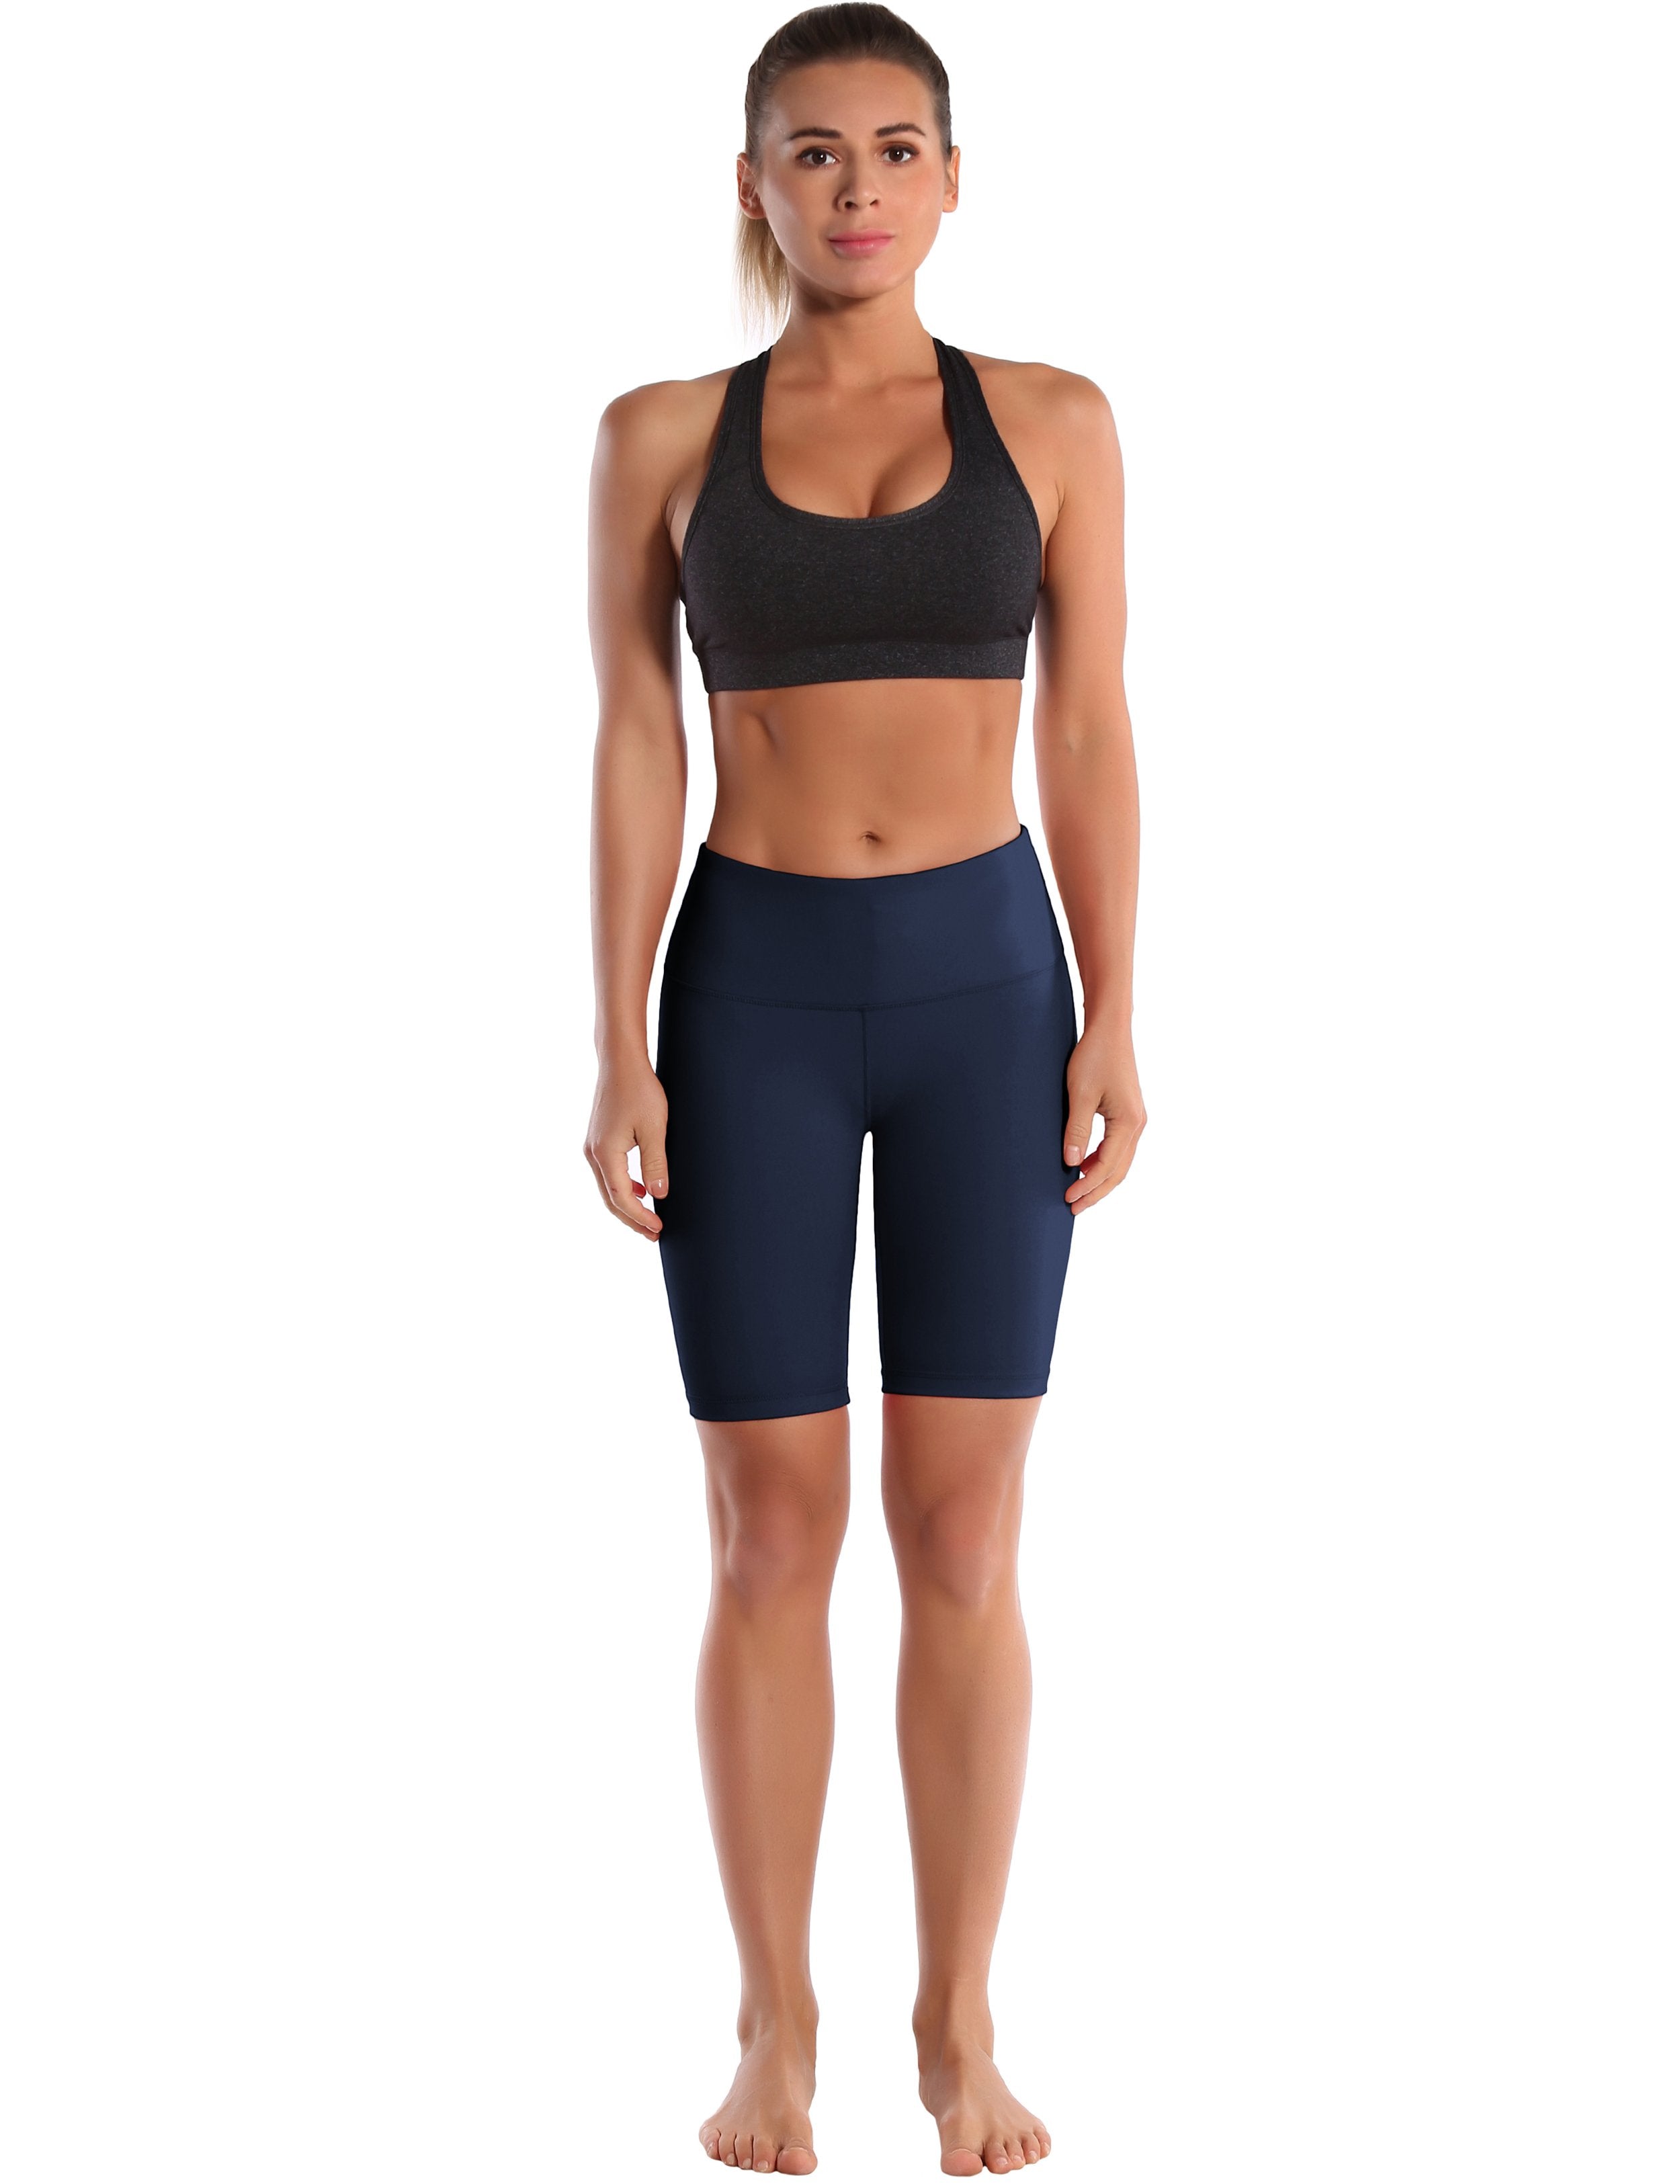 8" High Waist Yoga Shorts darknavy Sleek, soft, smooth and totally comfortable: our newest style is here. Softest-ever fabric High elasticity High density 4-way stretch Fabric doesn't attract lint easily No see-through Moisture-wicking Machine wash 75% Nylon, 25% Spandex